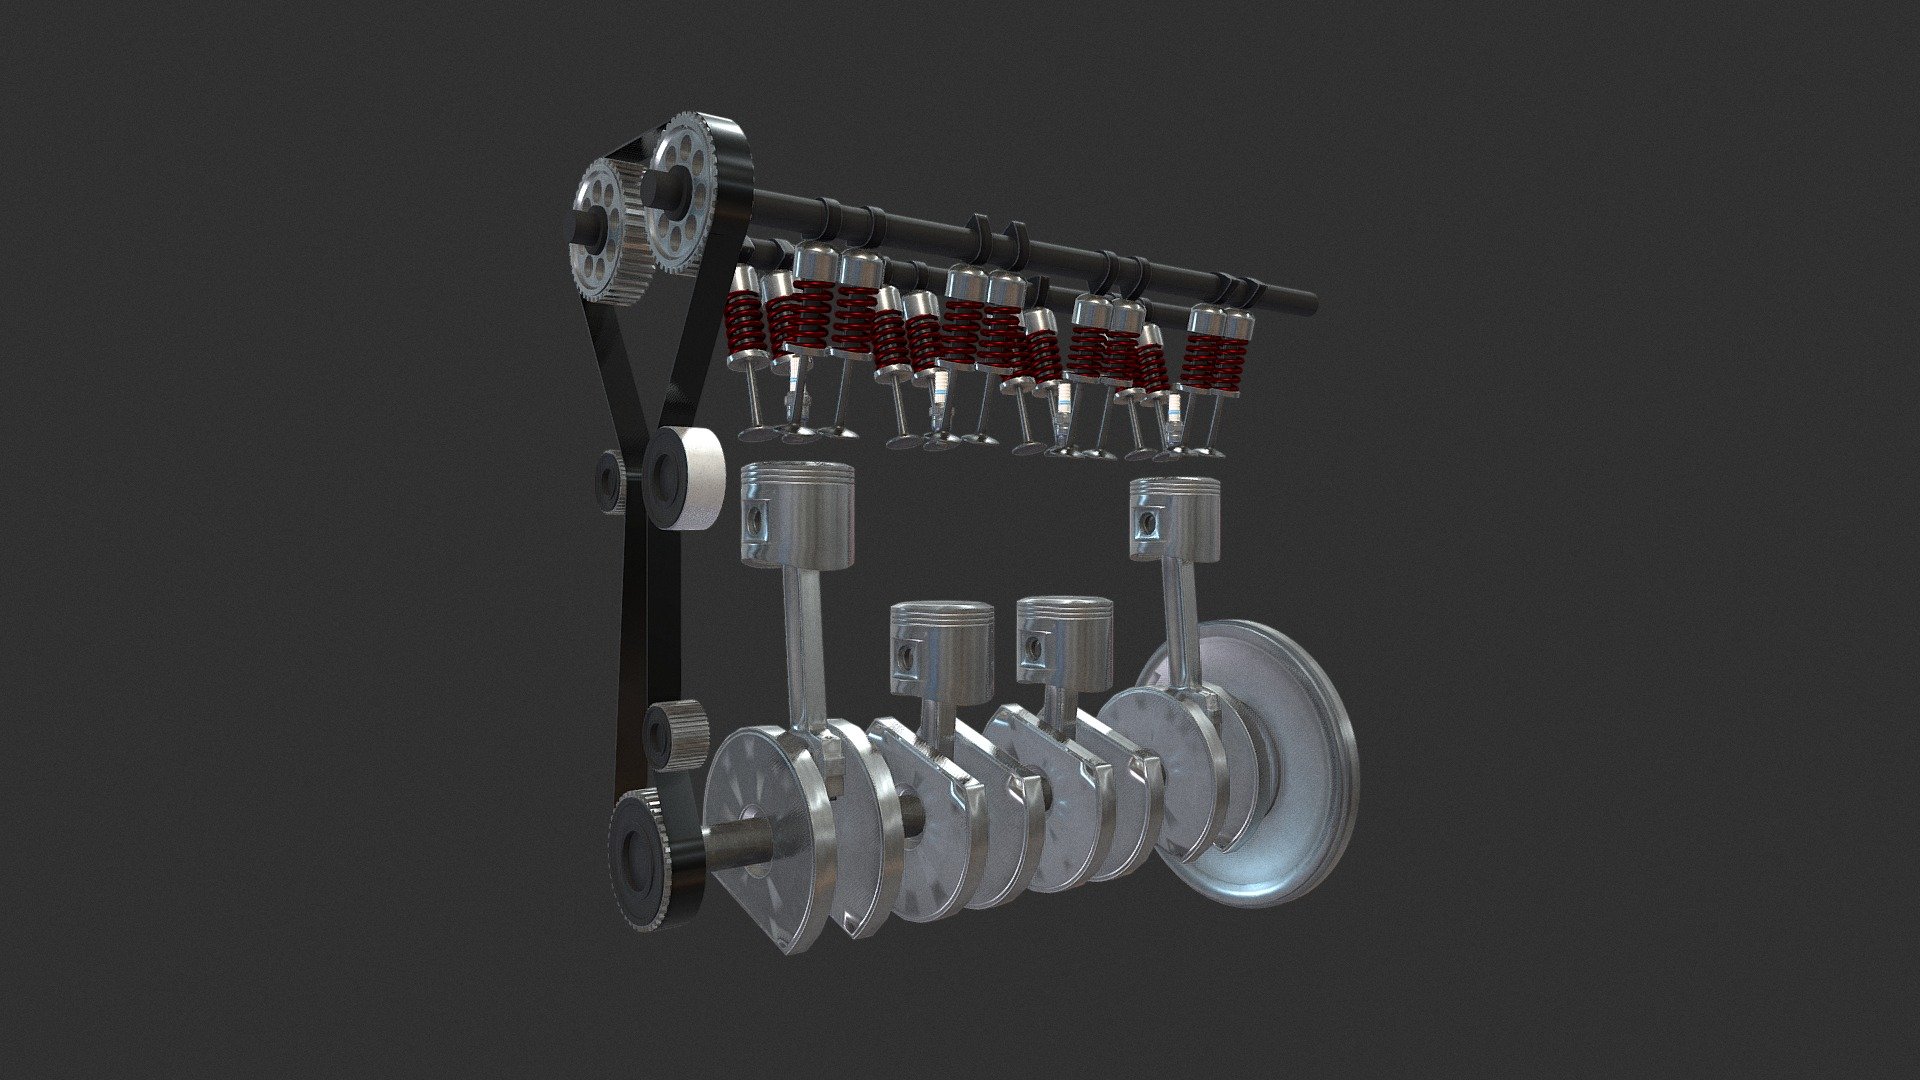 3D model of Animated Engine Parts
- Resolution of textures: 4096x4096
- Originally created with 3ds Max 2018 
- Textured created with Substance Painter 
- Unit system is set to centimeter.
- Riged Animtion in fbx and Max files
- Texture Set: 
Diffuse, Base Color, IOR, gloss, heigh, ior, normal, reflection, specular, AO, metallic, roughness
Special notes: 
- .fbx format is recommended for import in other 3d software. If your software doesn't support .fbx format, please use .3ds format; .obj, format was exported from 3ds Max. 
The geometry for .obj format is set to tris 3d model